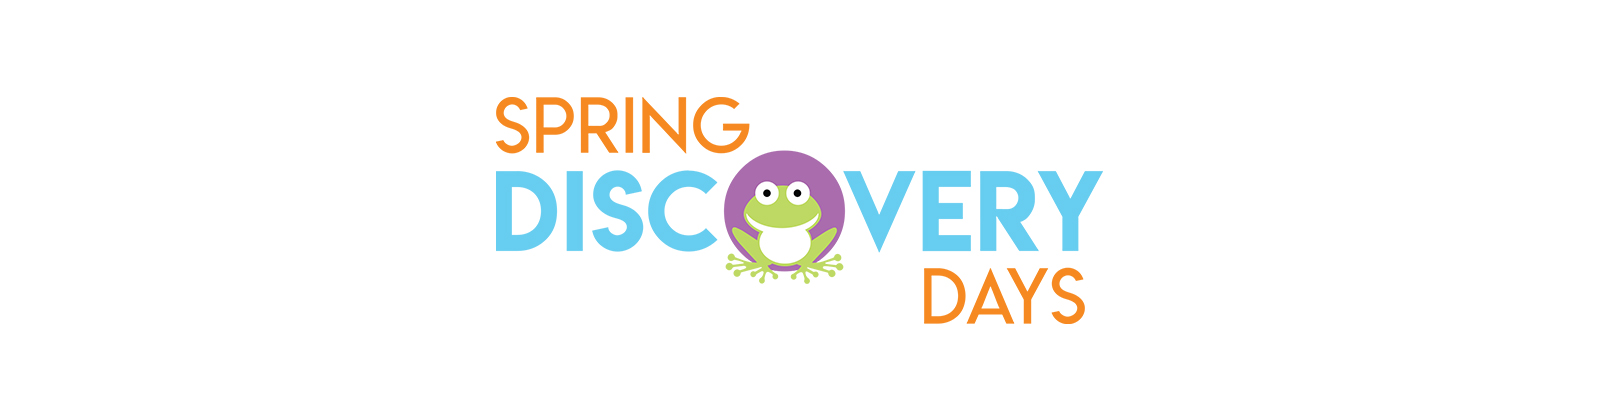 Spring Discovery Days